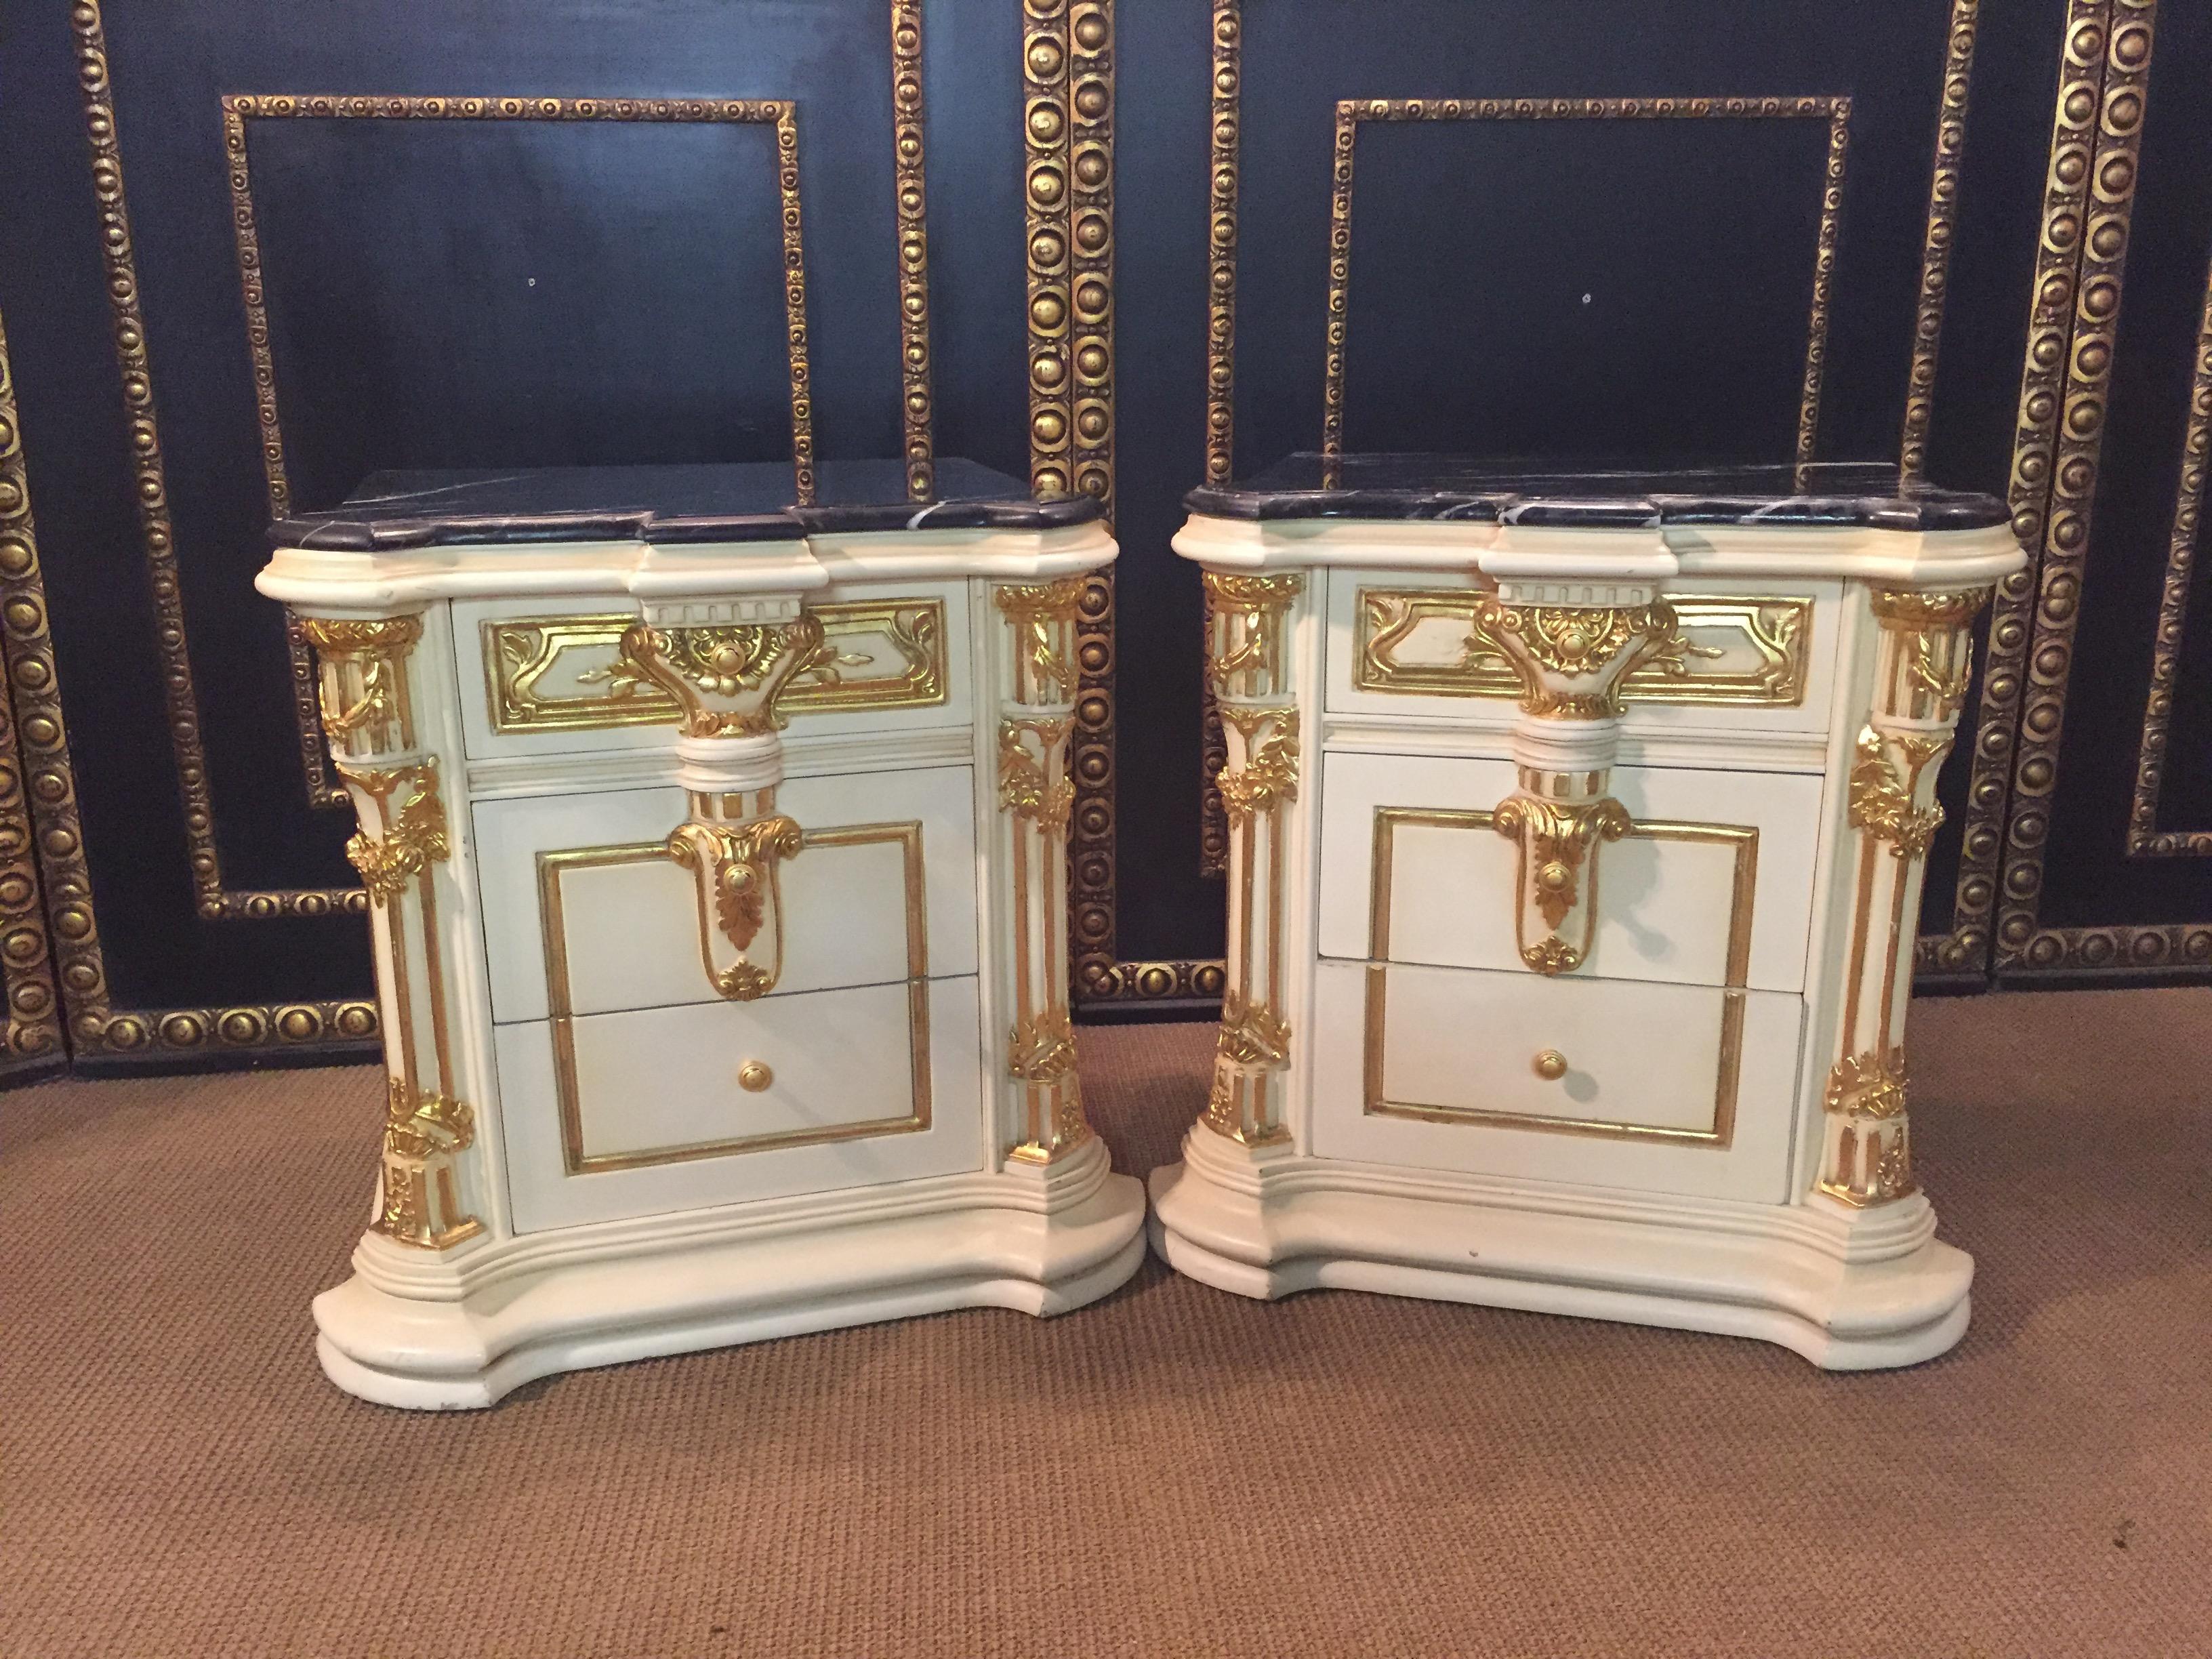 French Majestic Baroque Bedside Commode in the Style of Louis XVI